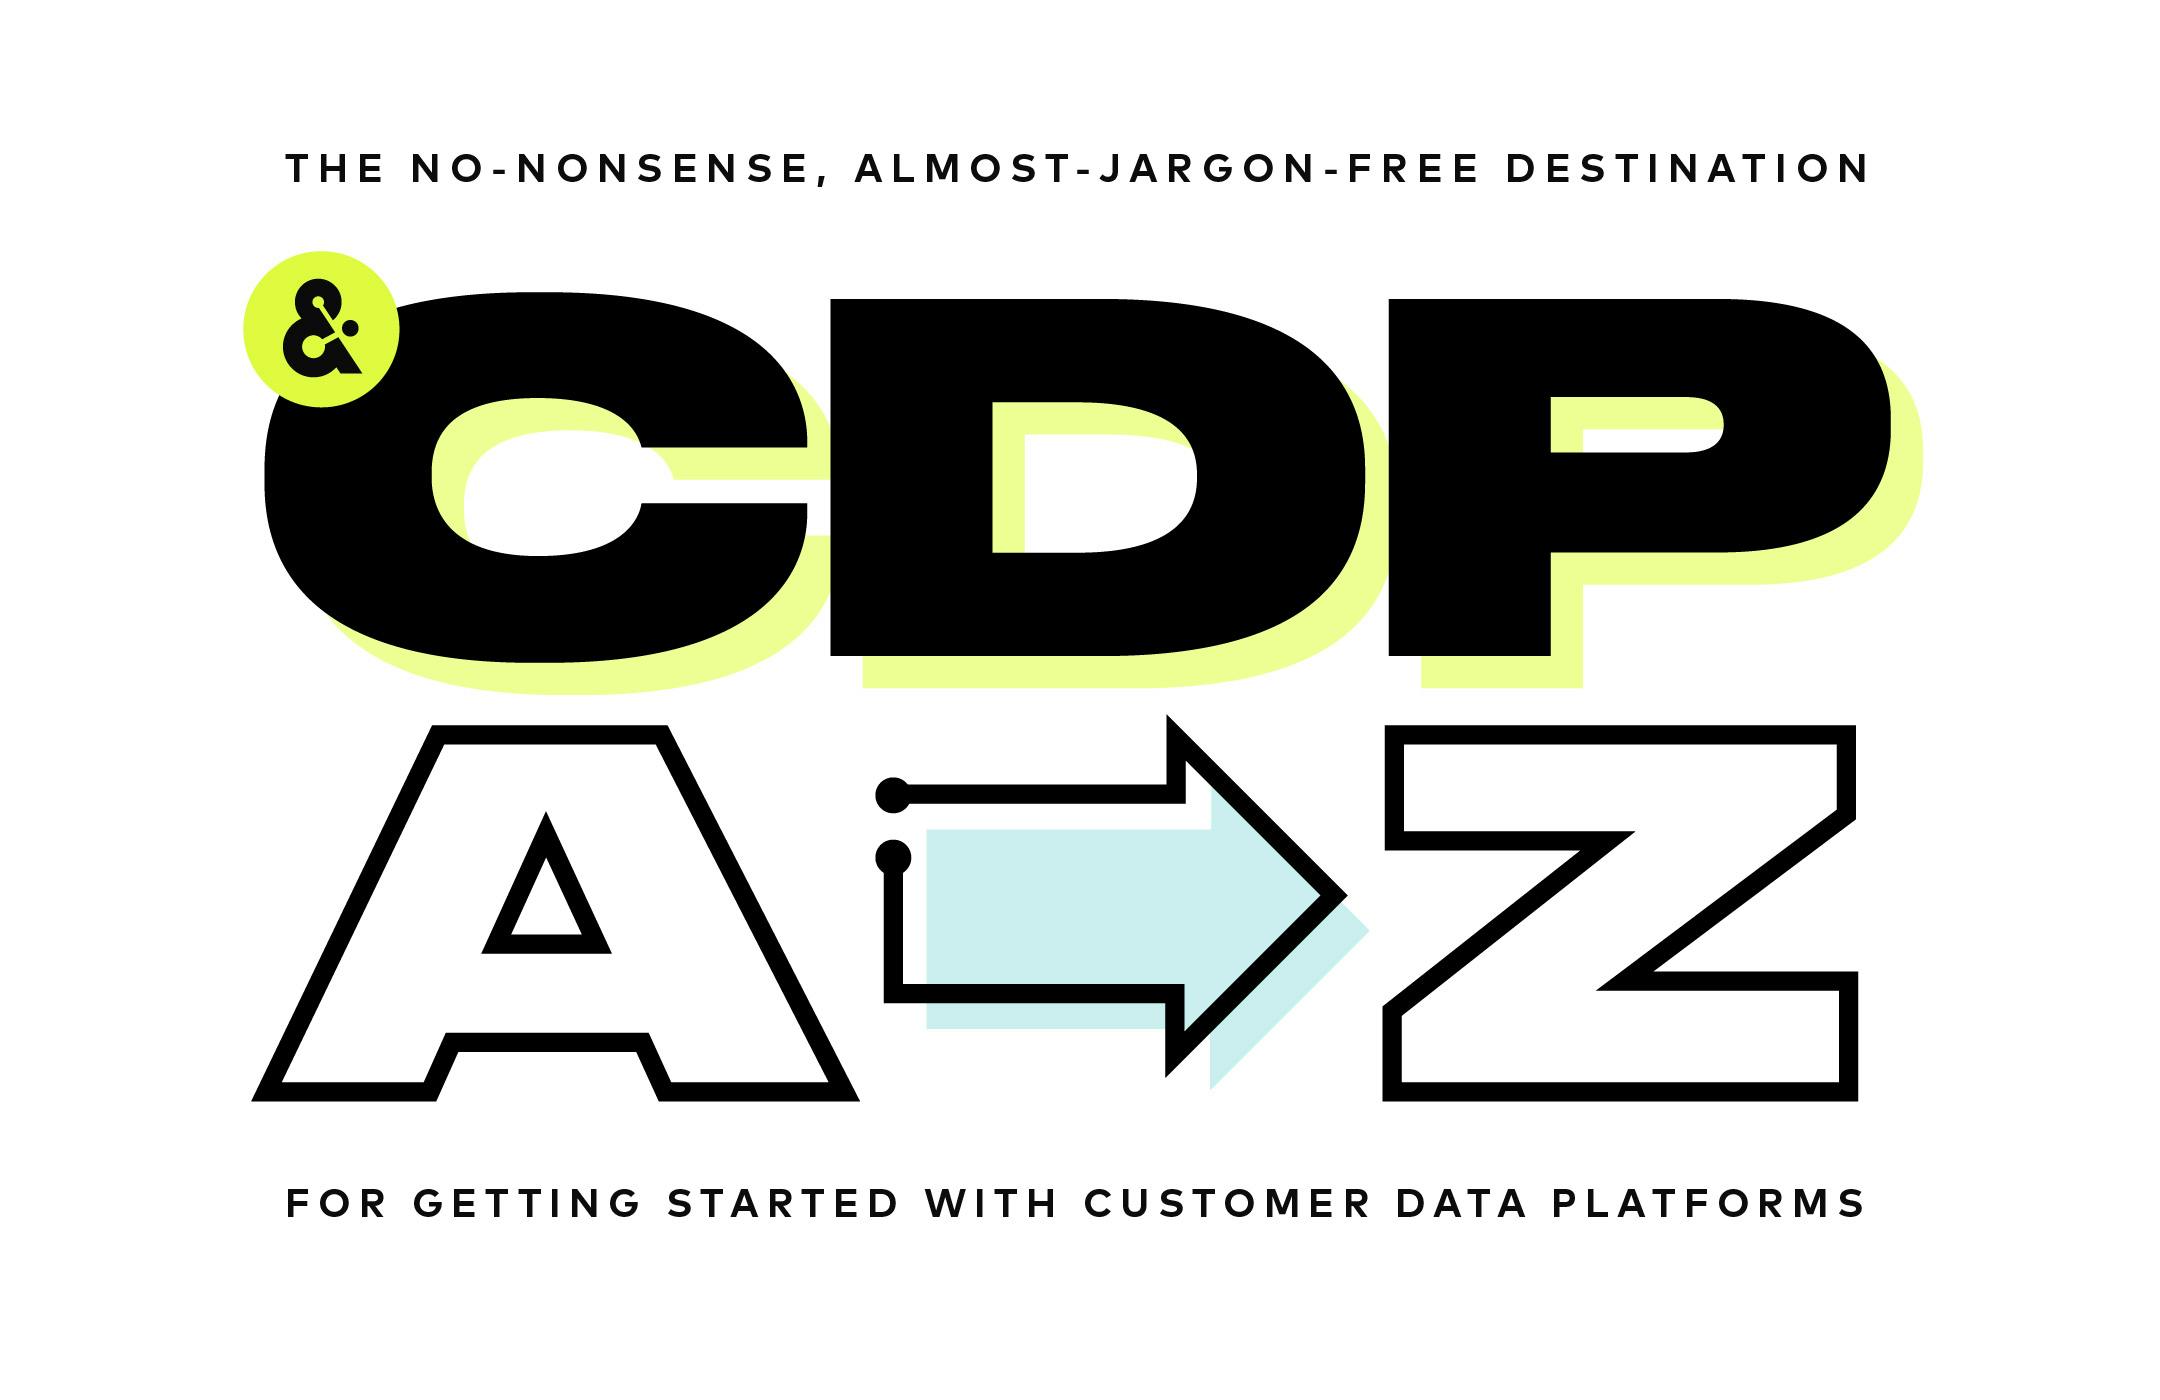 CDP A to Z: the no-nonsense destination for getting started with Customer Data Platforms